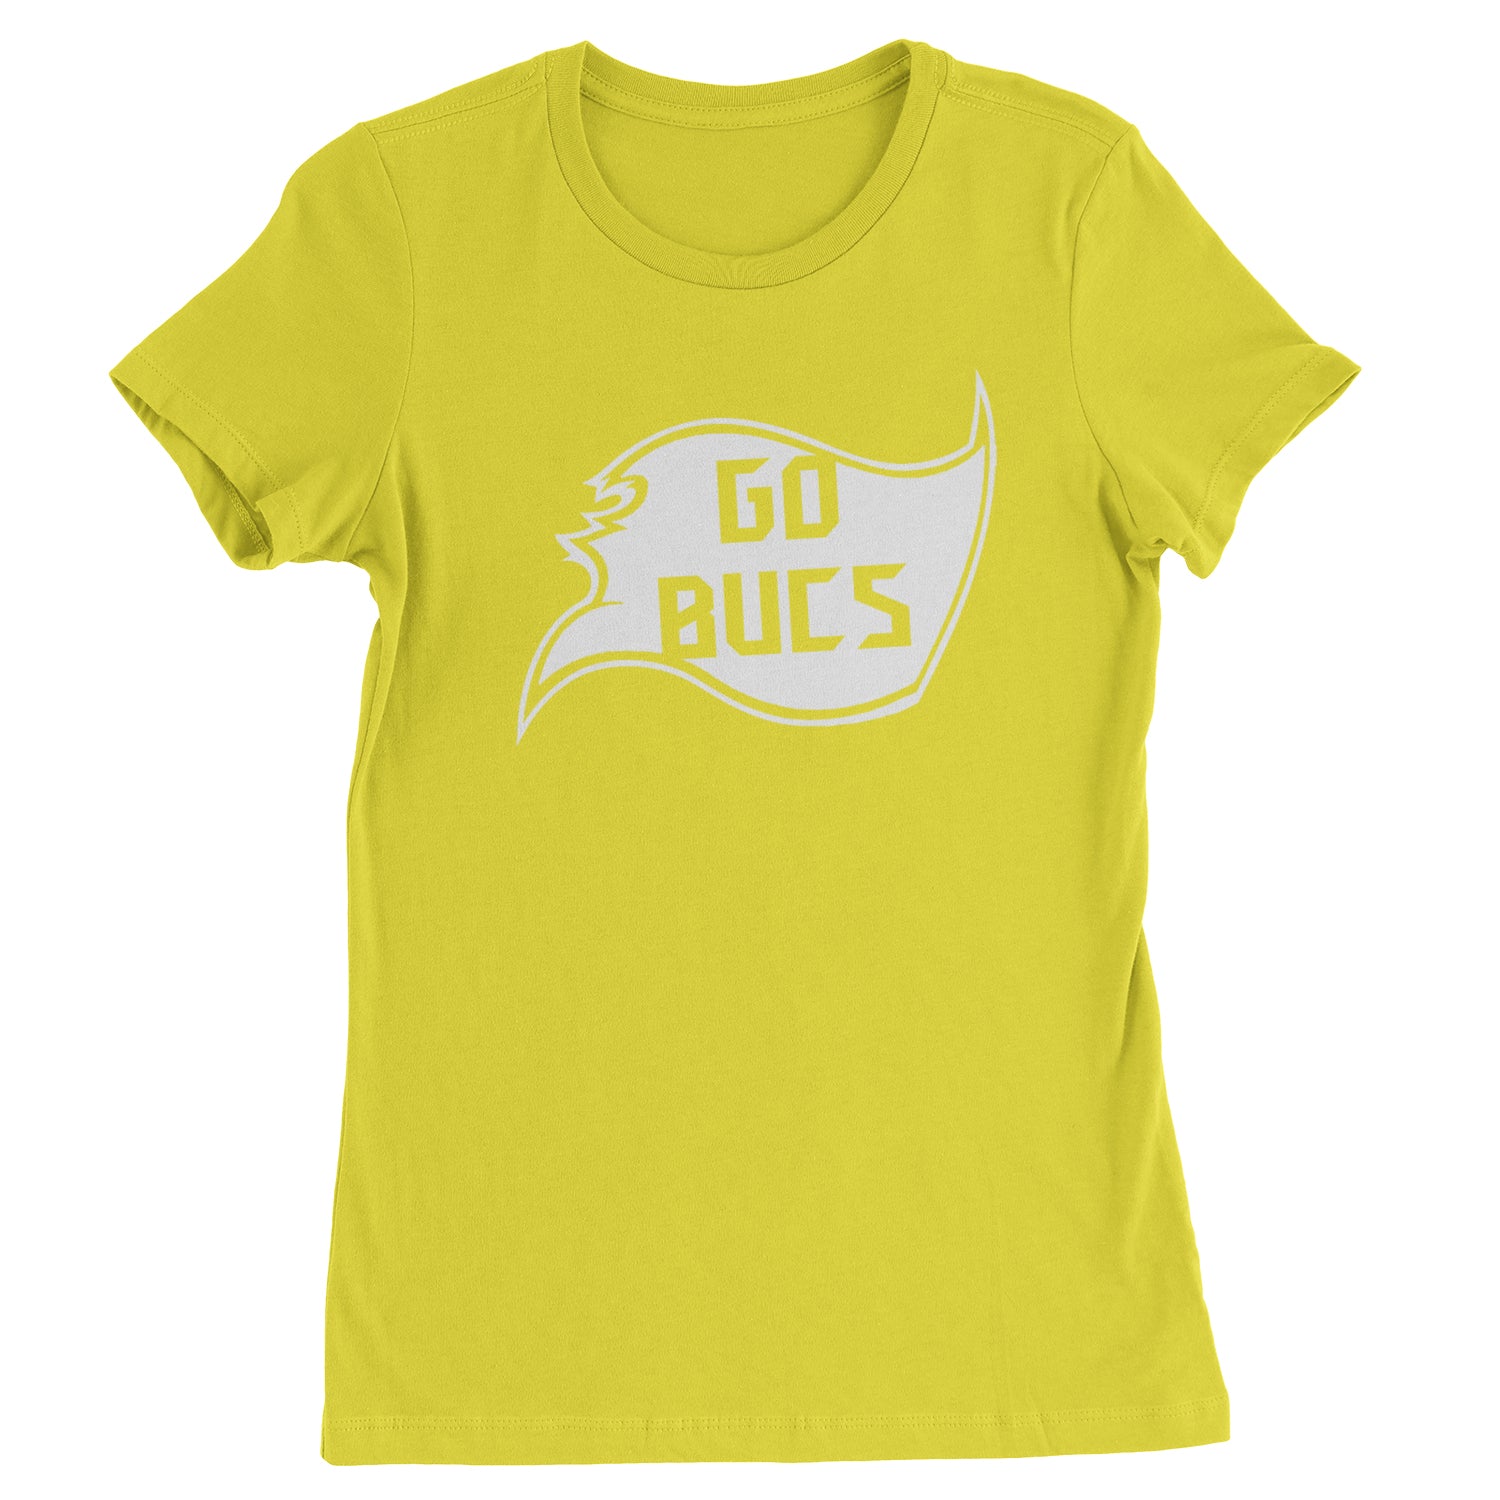 Go Bucs Buccaneers Womens T-shirt ball, flag, foot, raise, tampa, the by Expression Tees